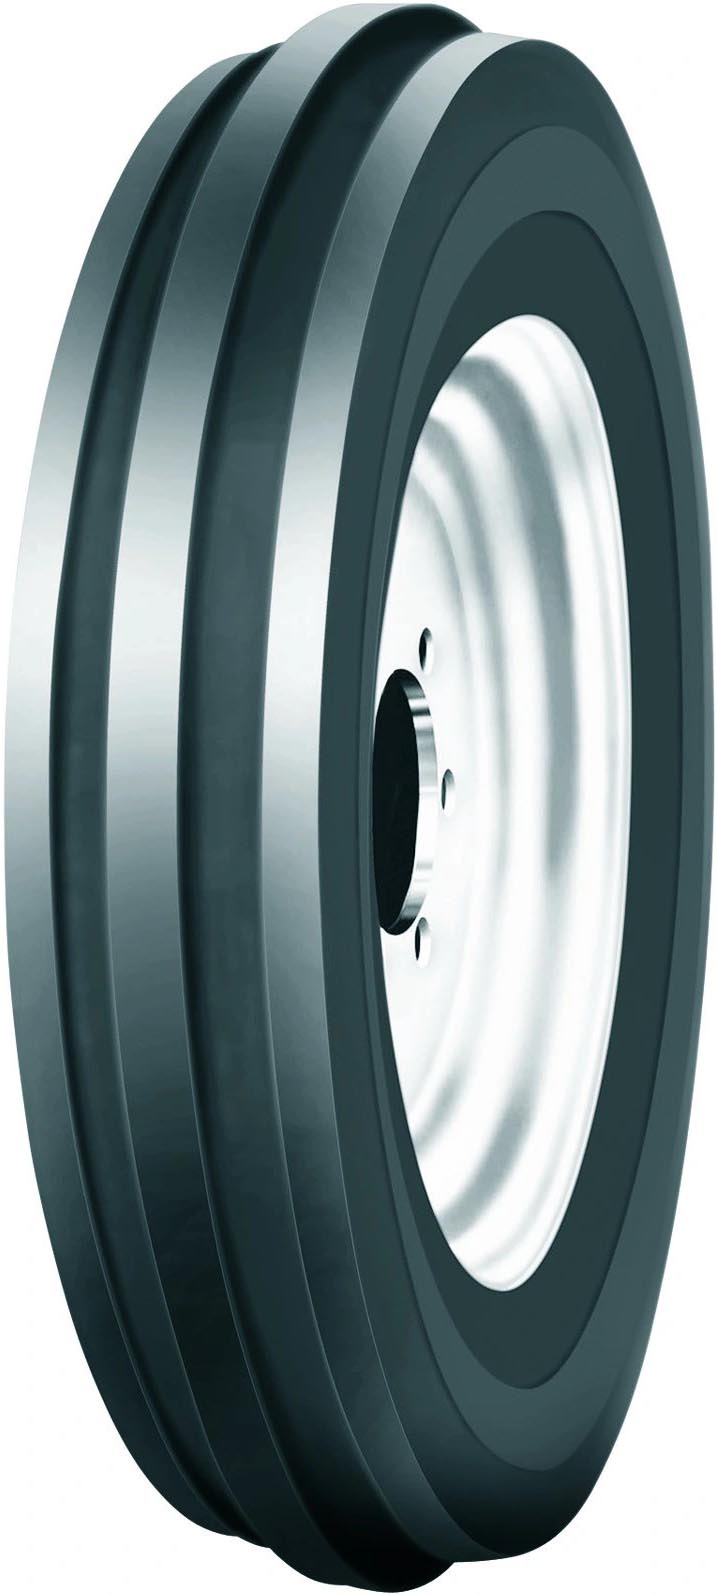 product_type-industrial_tires CULTOR AS-Front 10 8PR TT 6 R19 P